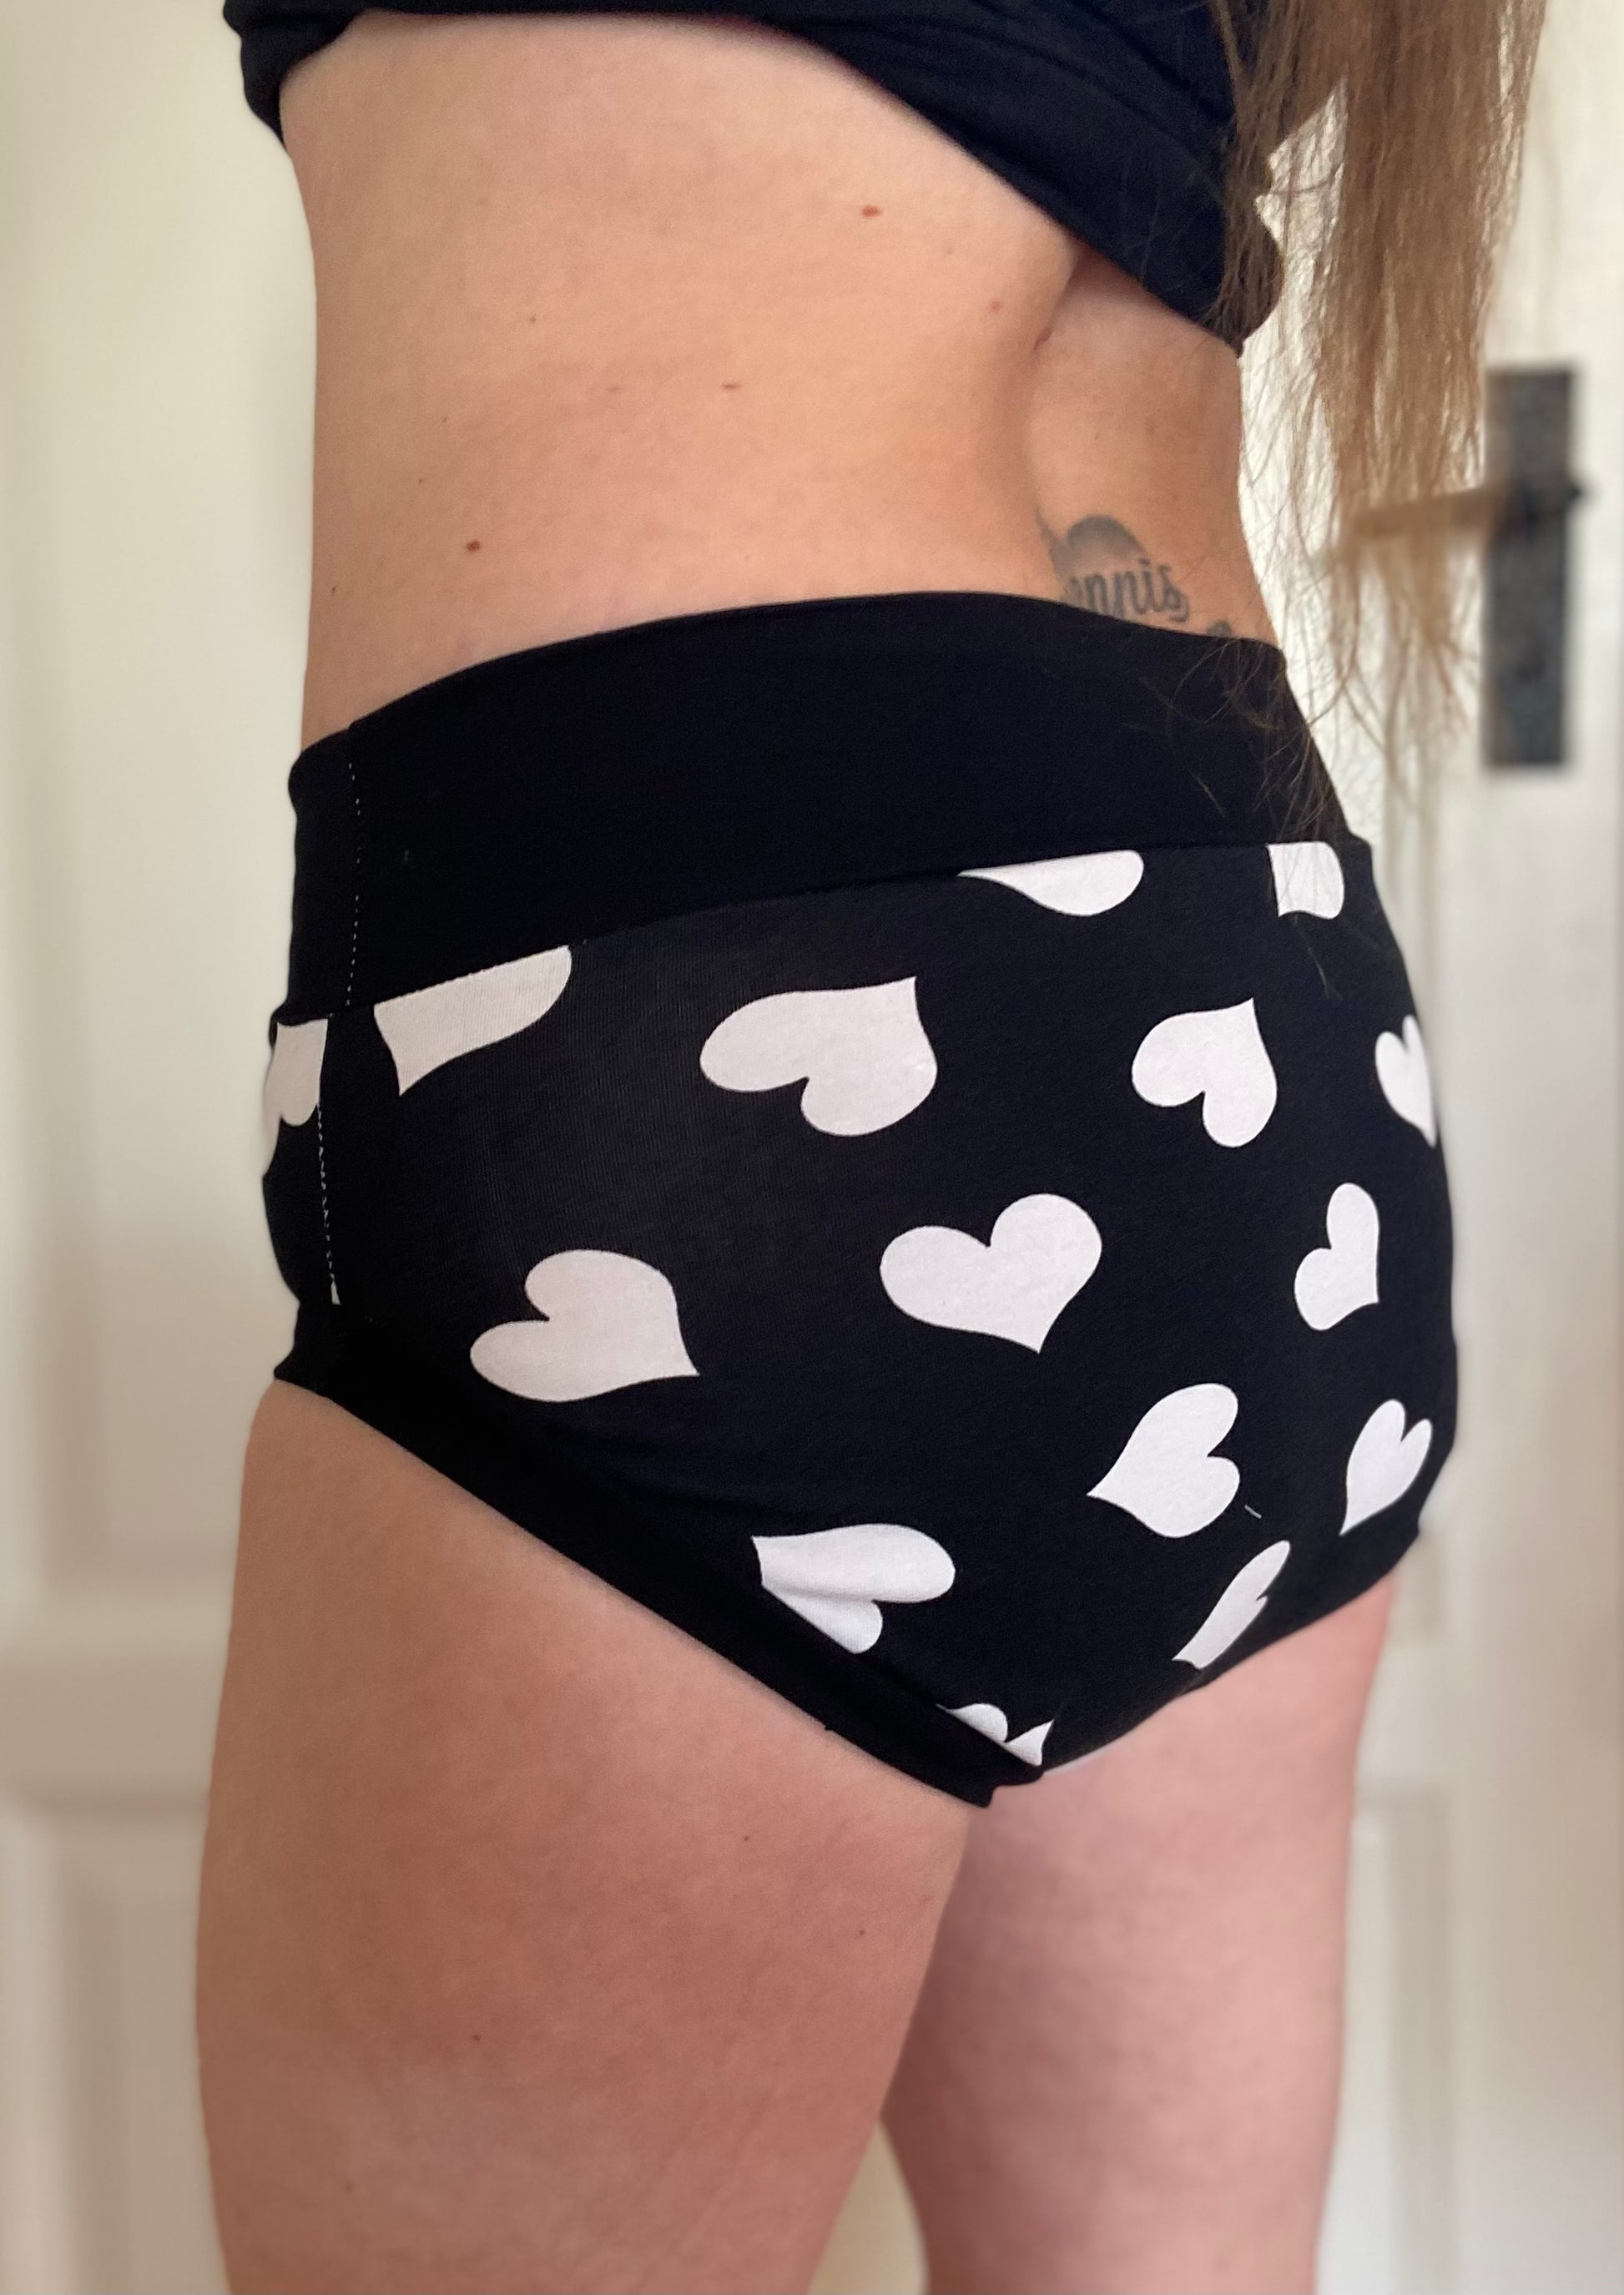 fullback polka dot panties of the day! PM me if you're interested